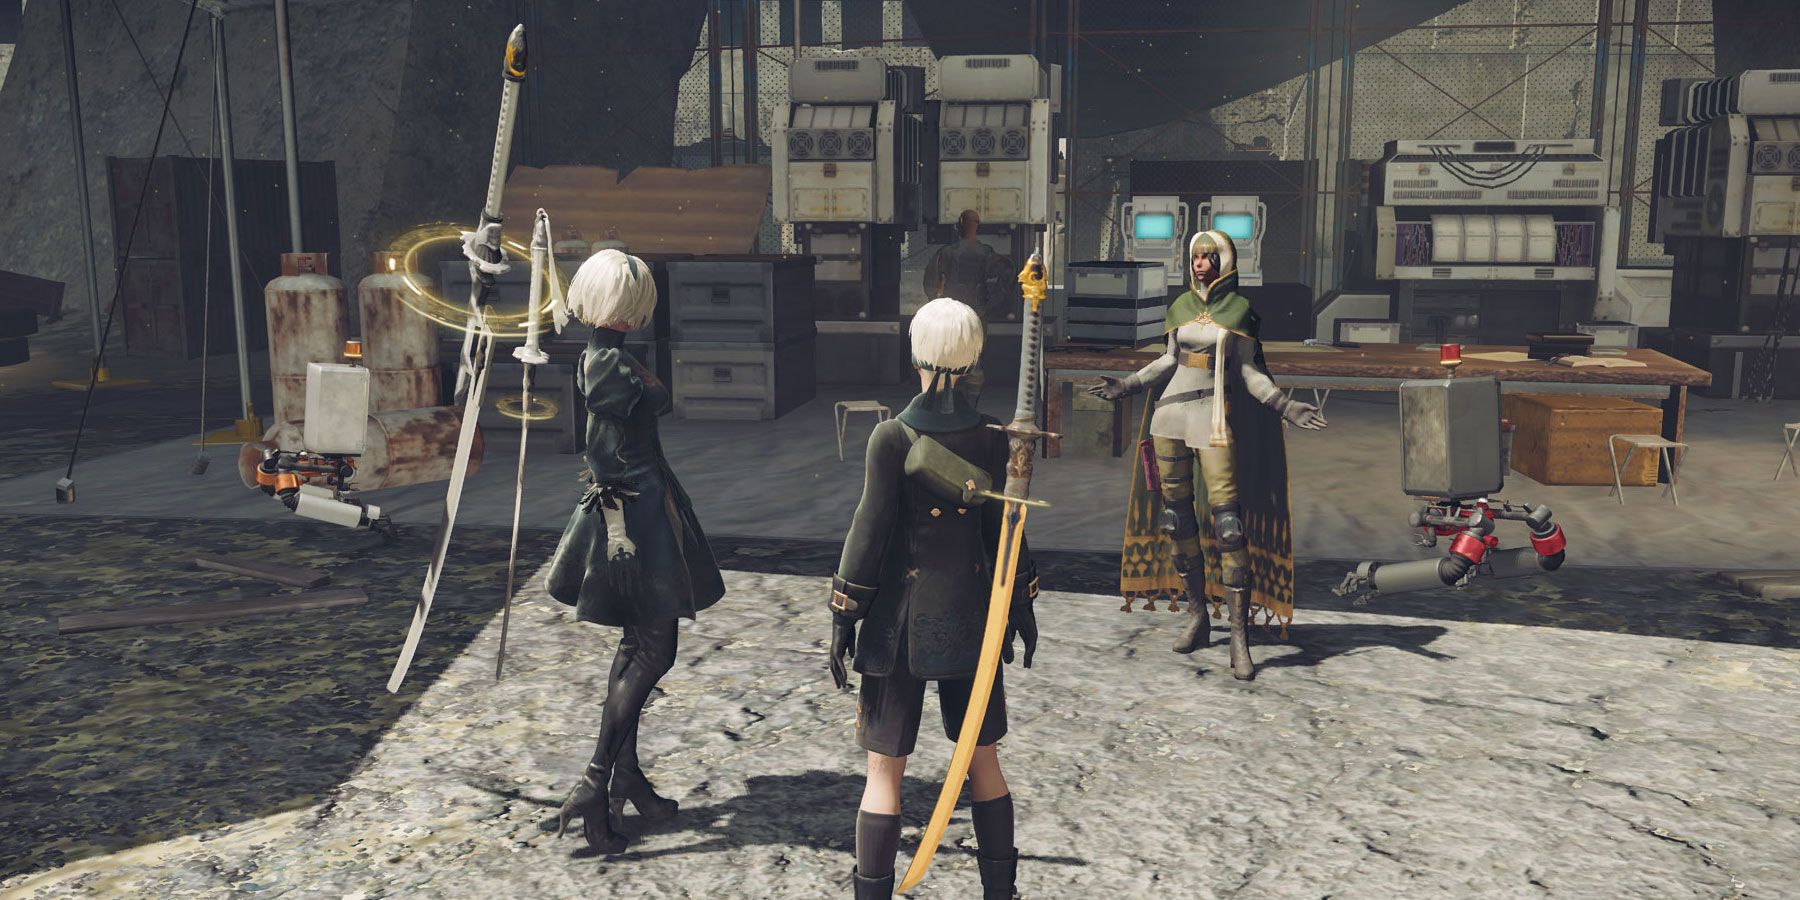 2B and 9S at the resistance camp with Anemone in NieR: Automata